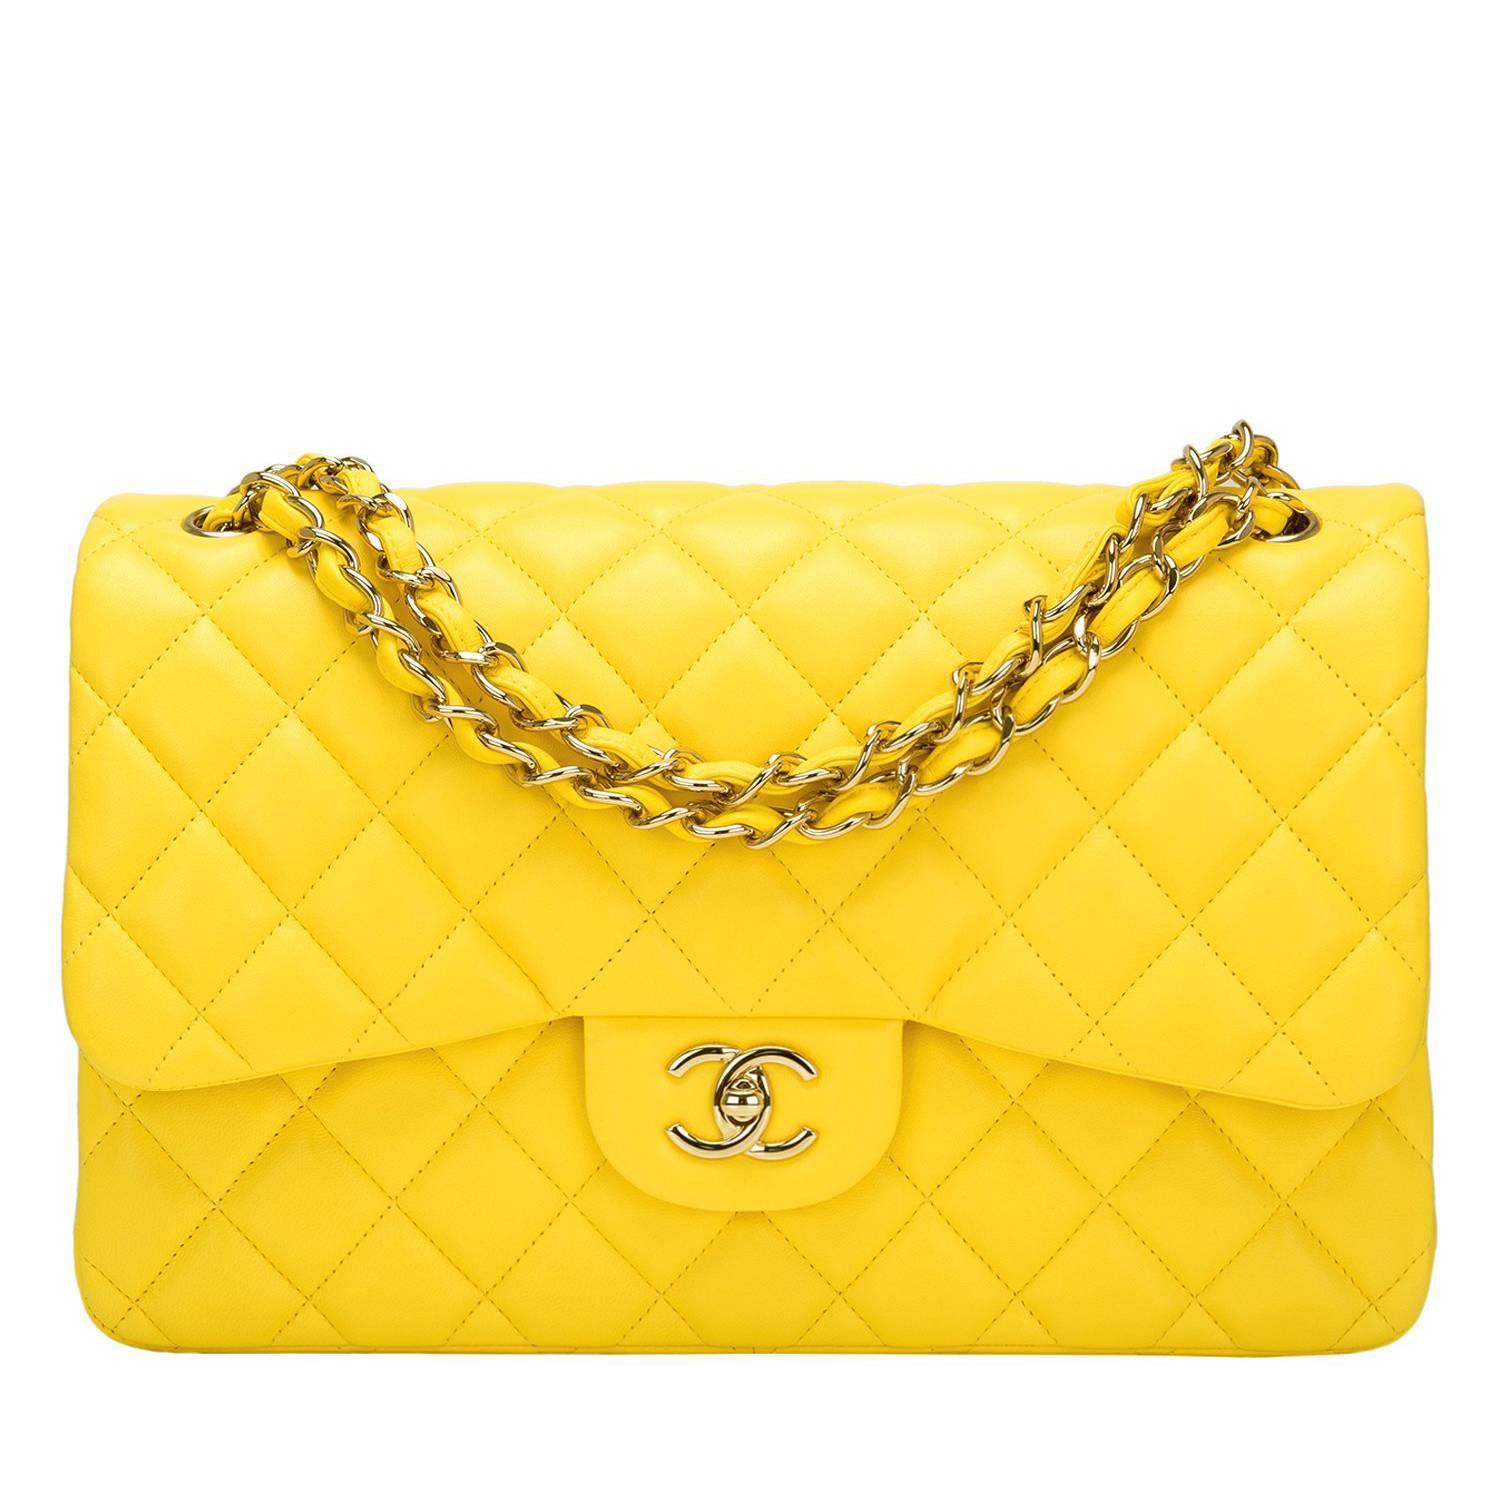 Chanel Yellow Quilted Lambskin Jumbo Classic Double Flap Bag at 1stdibs